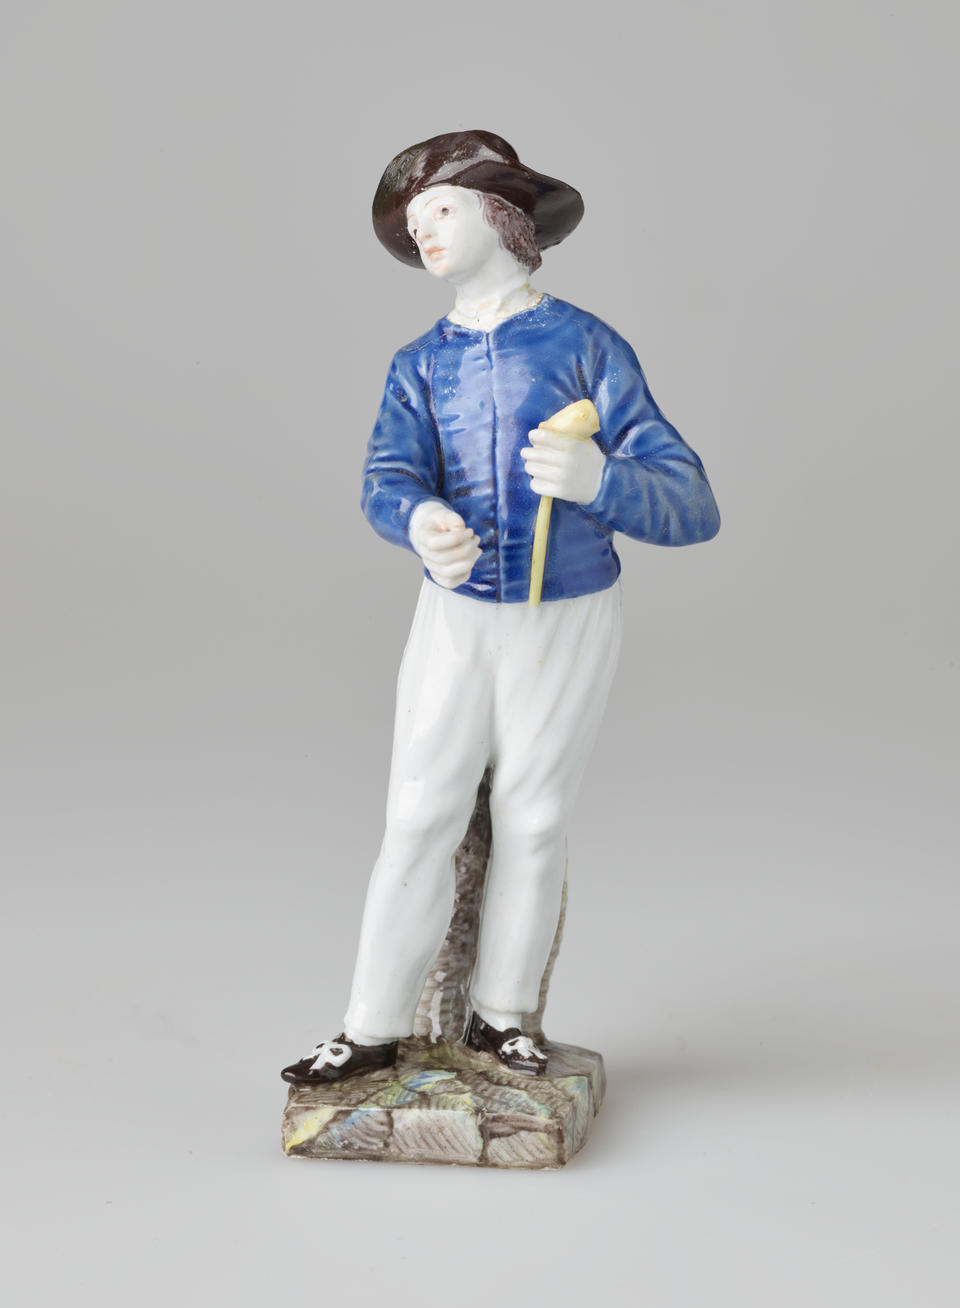 A sculpture of a figure in historical clothes, a blue shirt, white pants, black shoes and hat. The figure is also holding a pipe.